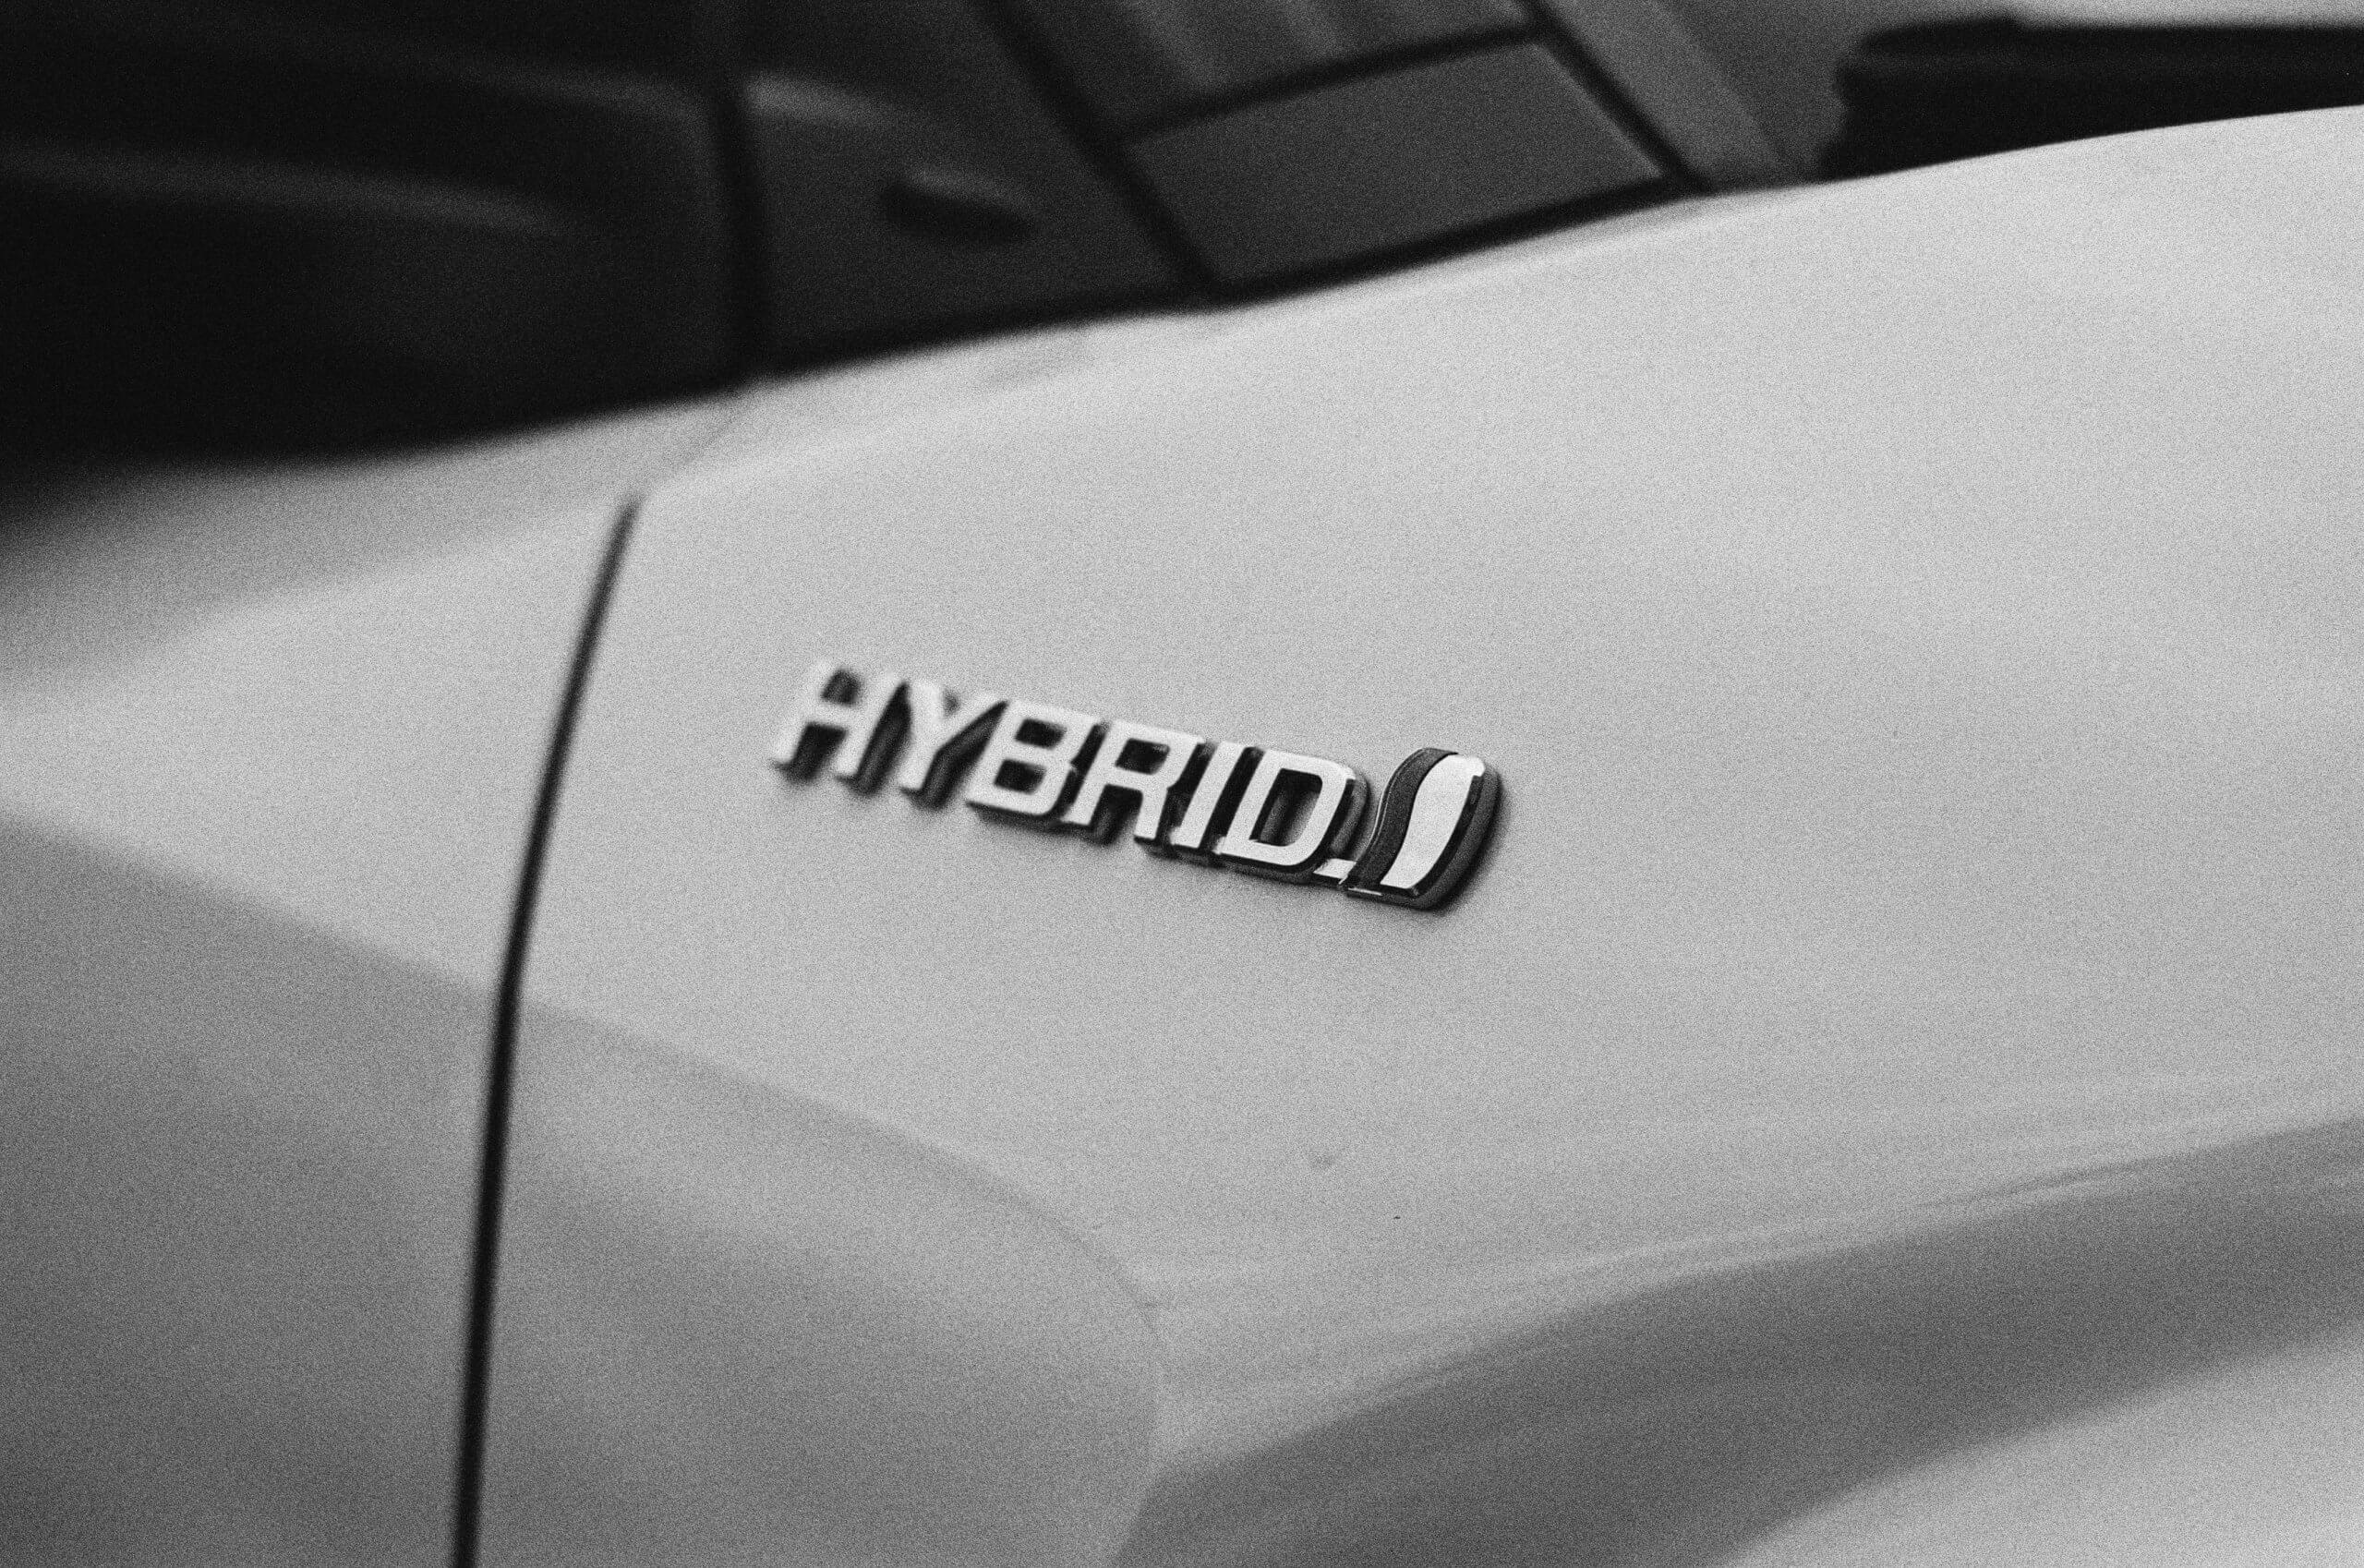 There is no scientific evidence to suggest any significant health risk to drivers and passengers due to the levels of non-ionizing radiation emitted by hybrid vehicles. Photo by Markus Spiske on Unsplash